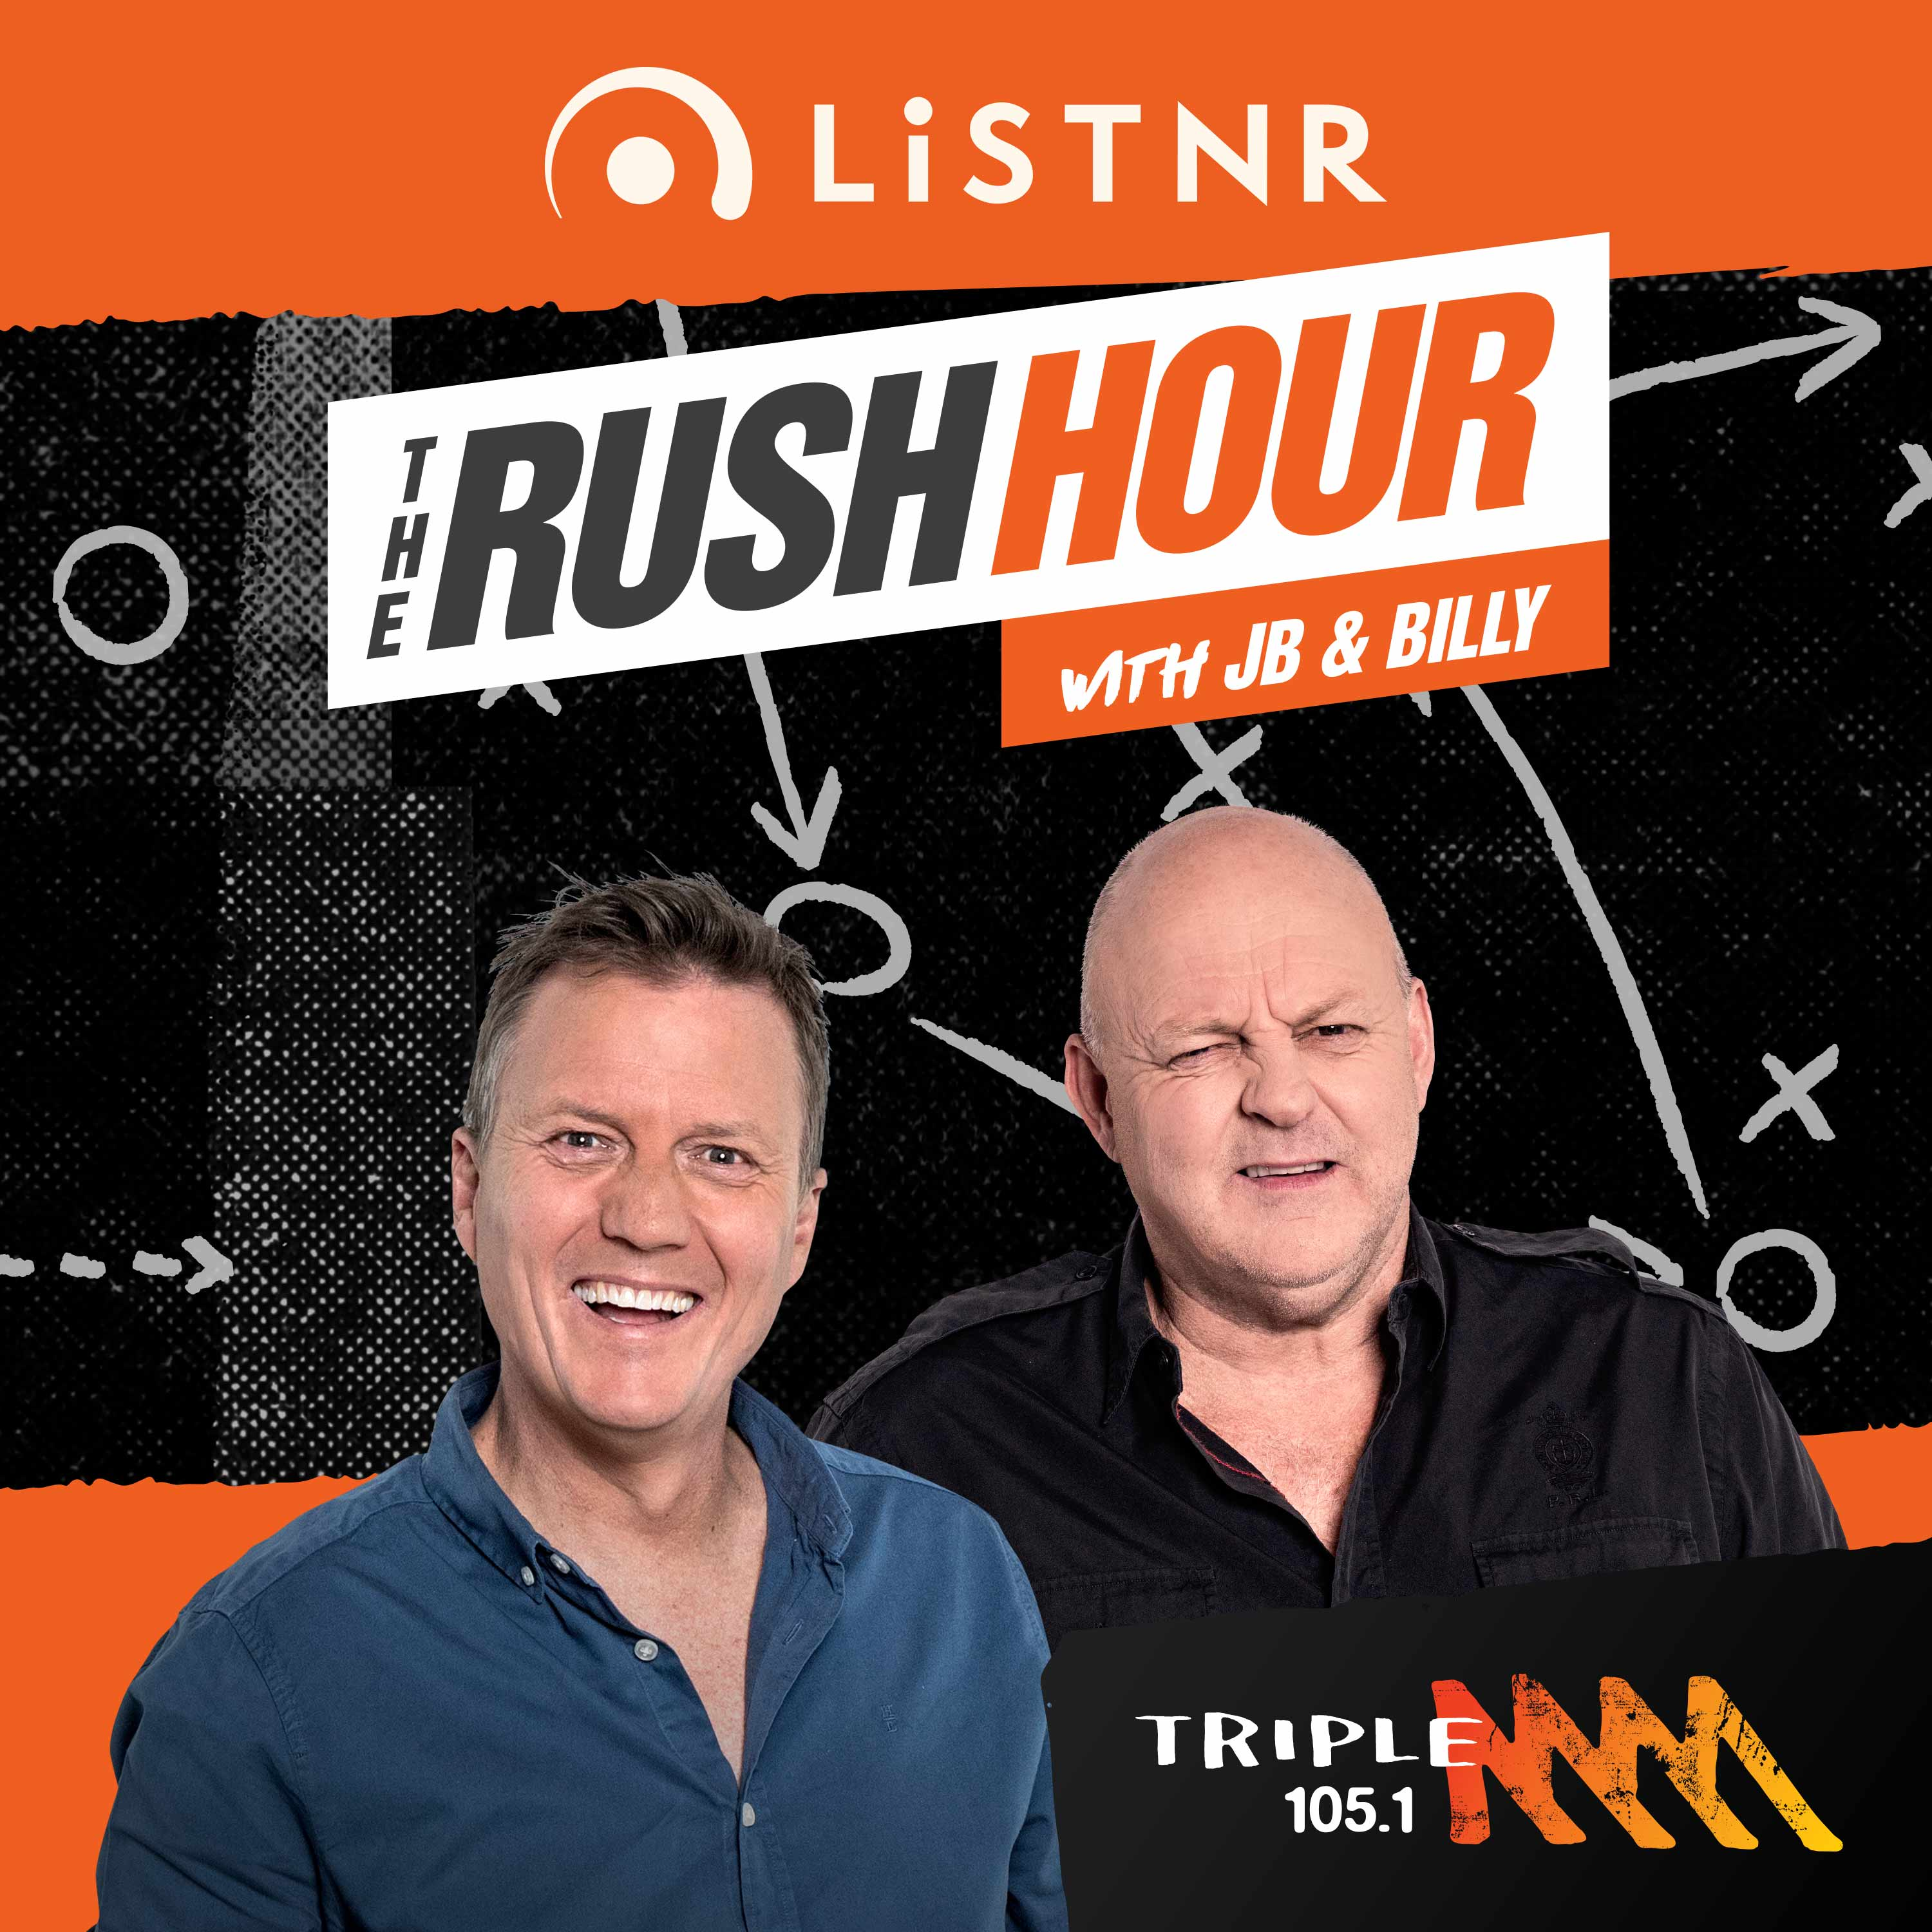 Billy's Comprehensive Tokyo Wrap, Damo on finals locations - The Rush Hour podcast - Monday 9th August 2021